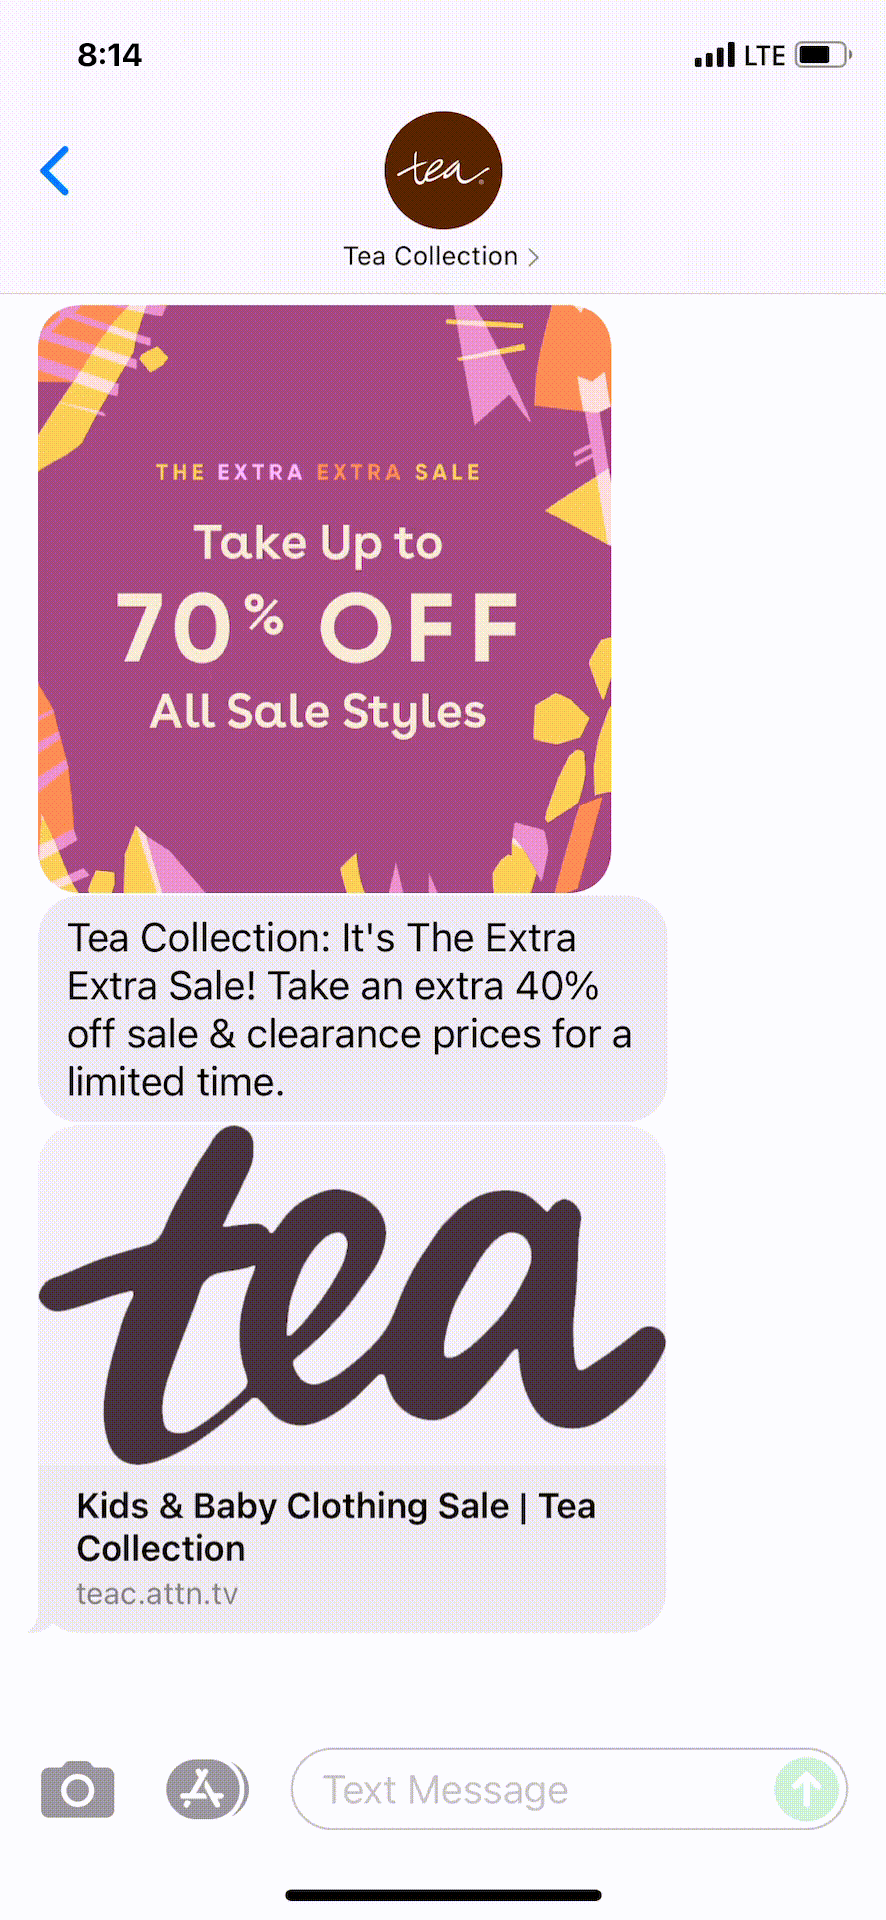 Tea-Collection-Text-Message-Marketing-Example-08.25.2021